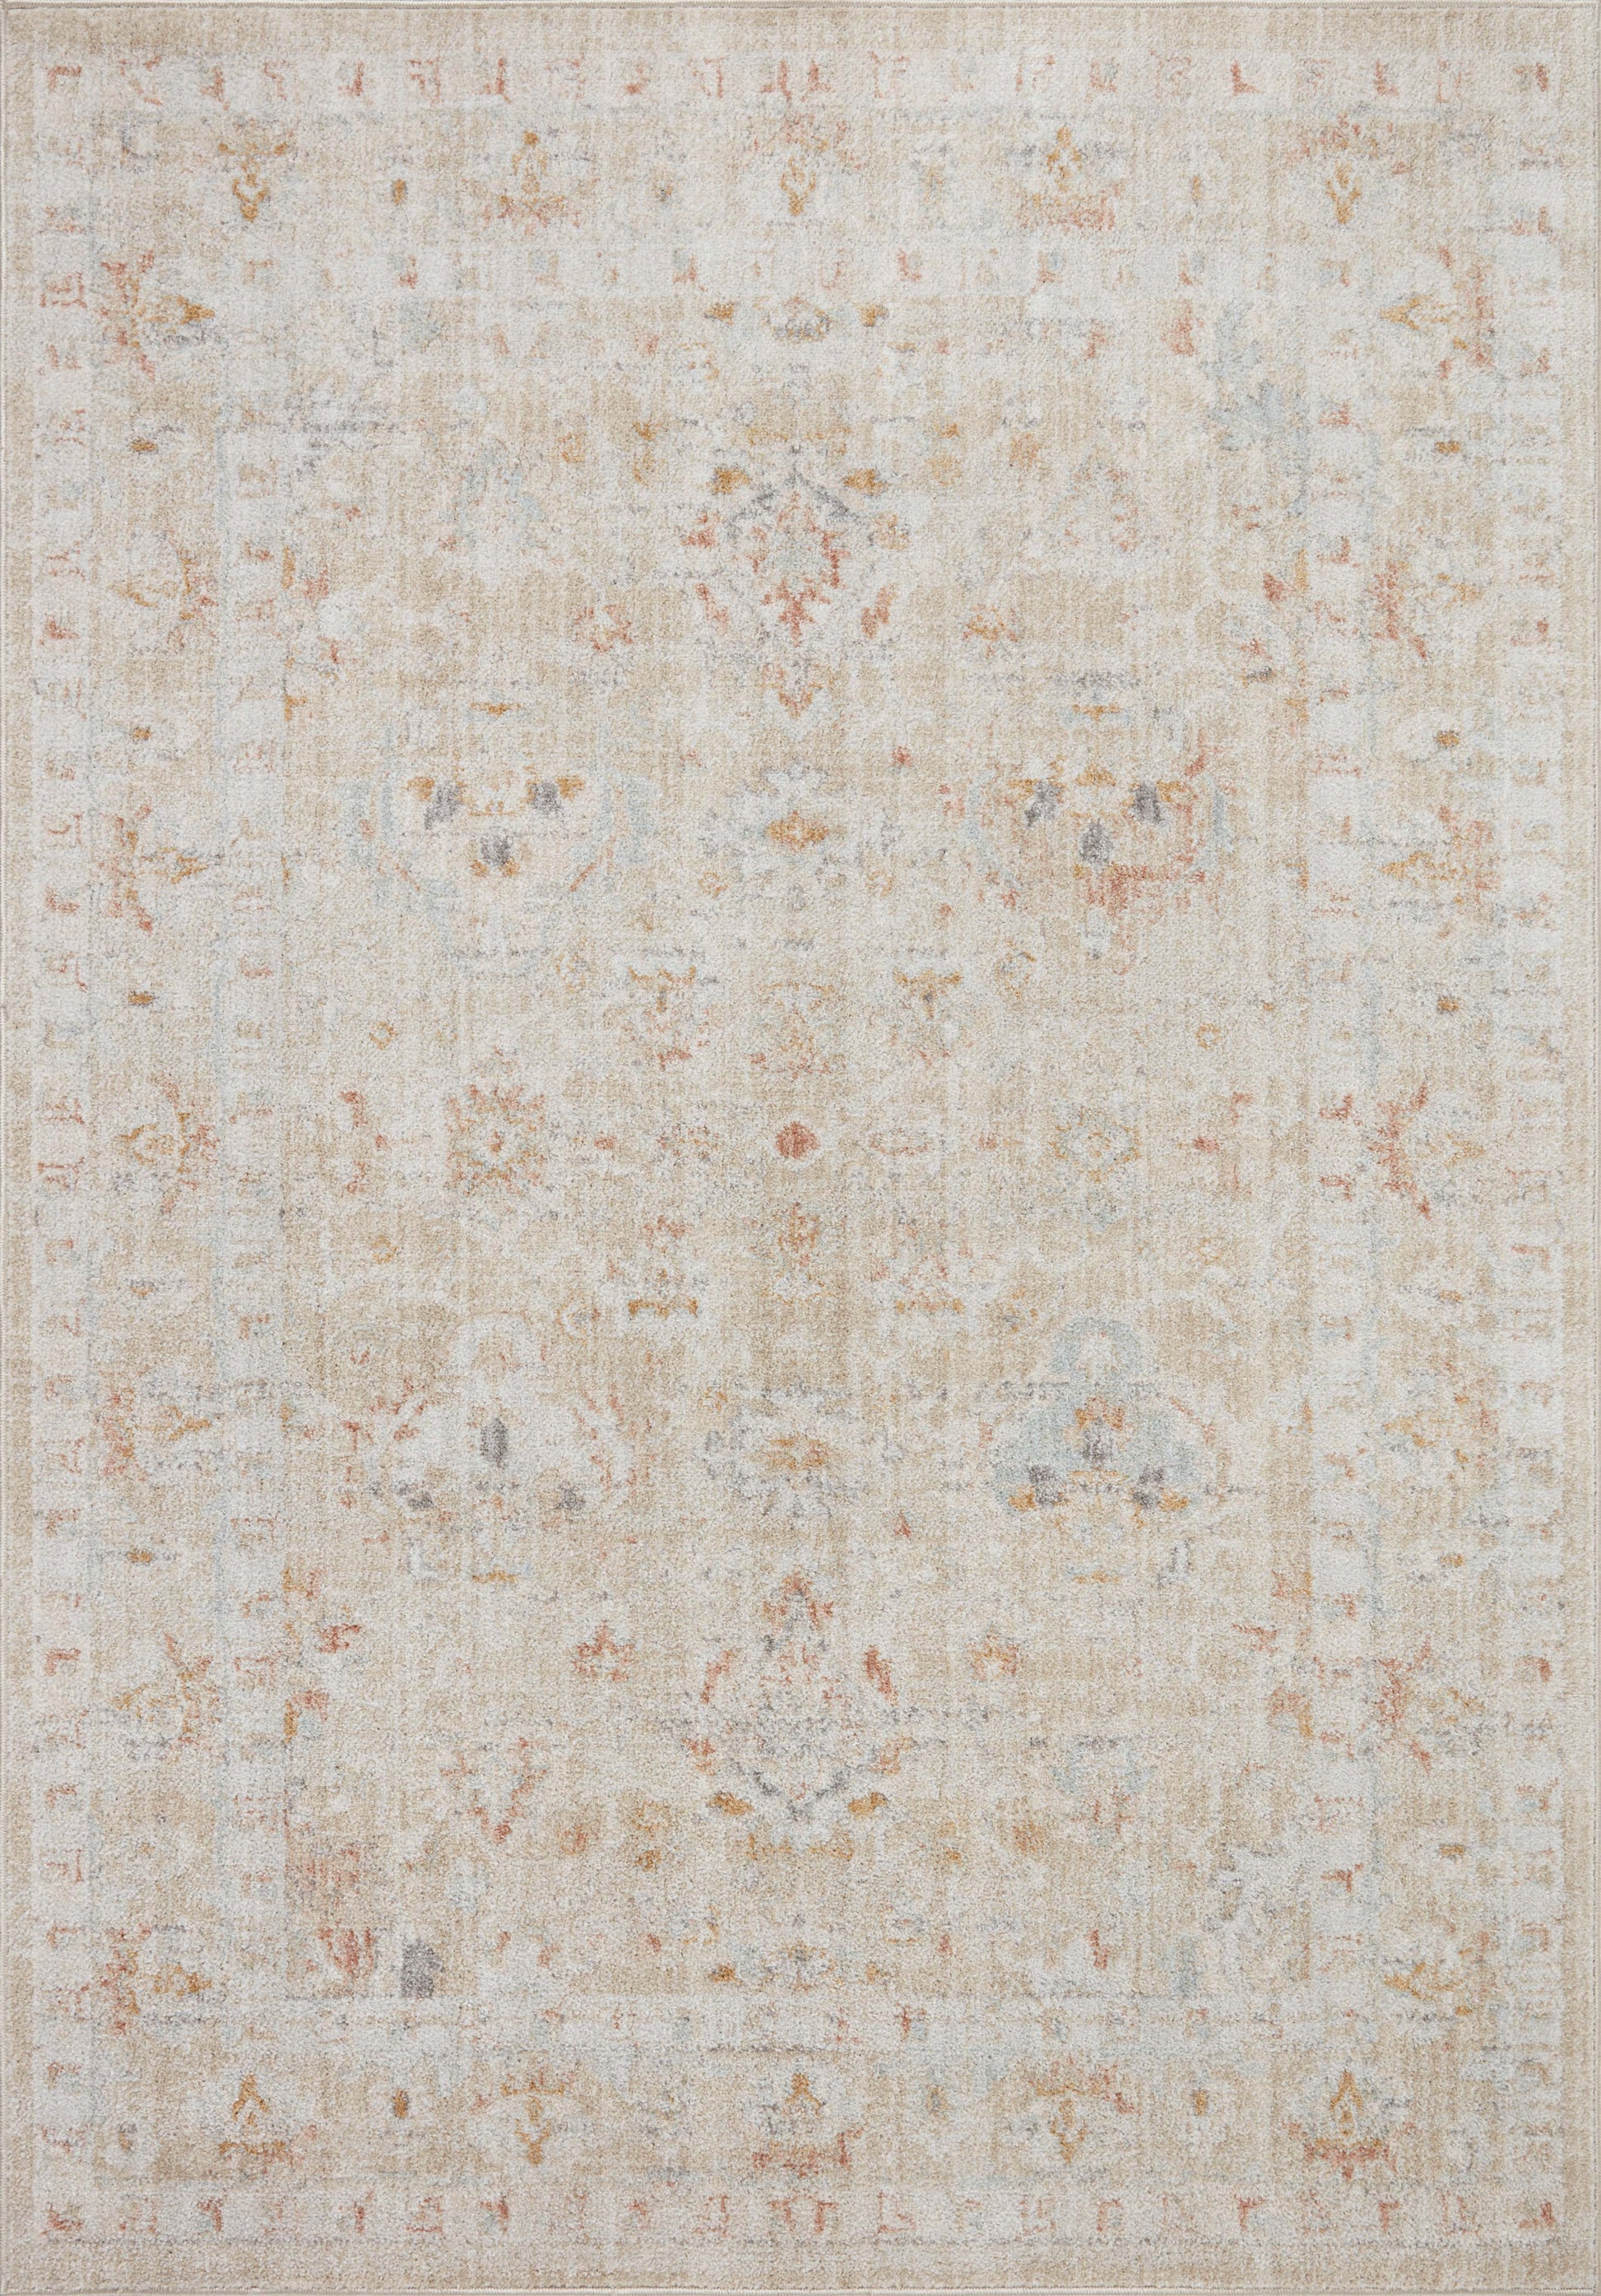 A picture of Loloi's Monroe rug, in style MON-05, color Sand / Sunrise